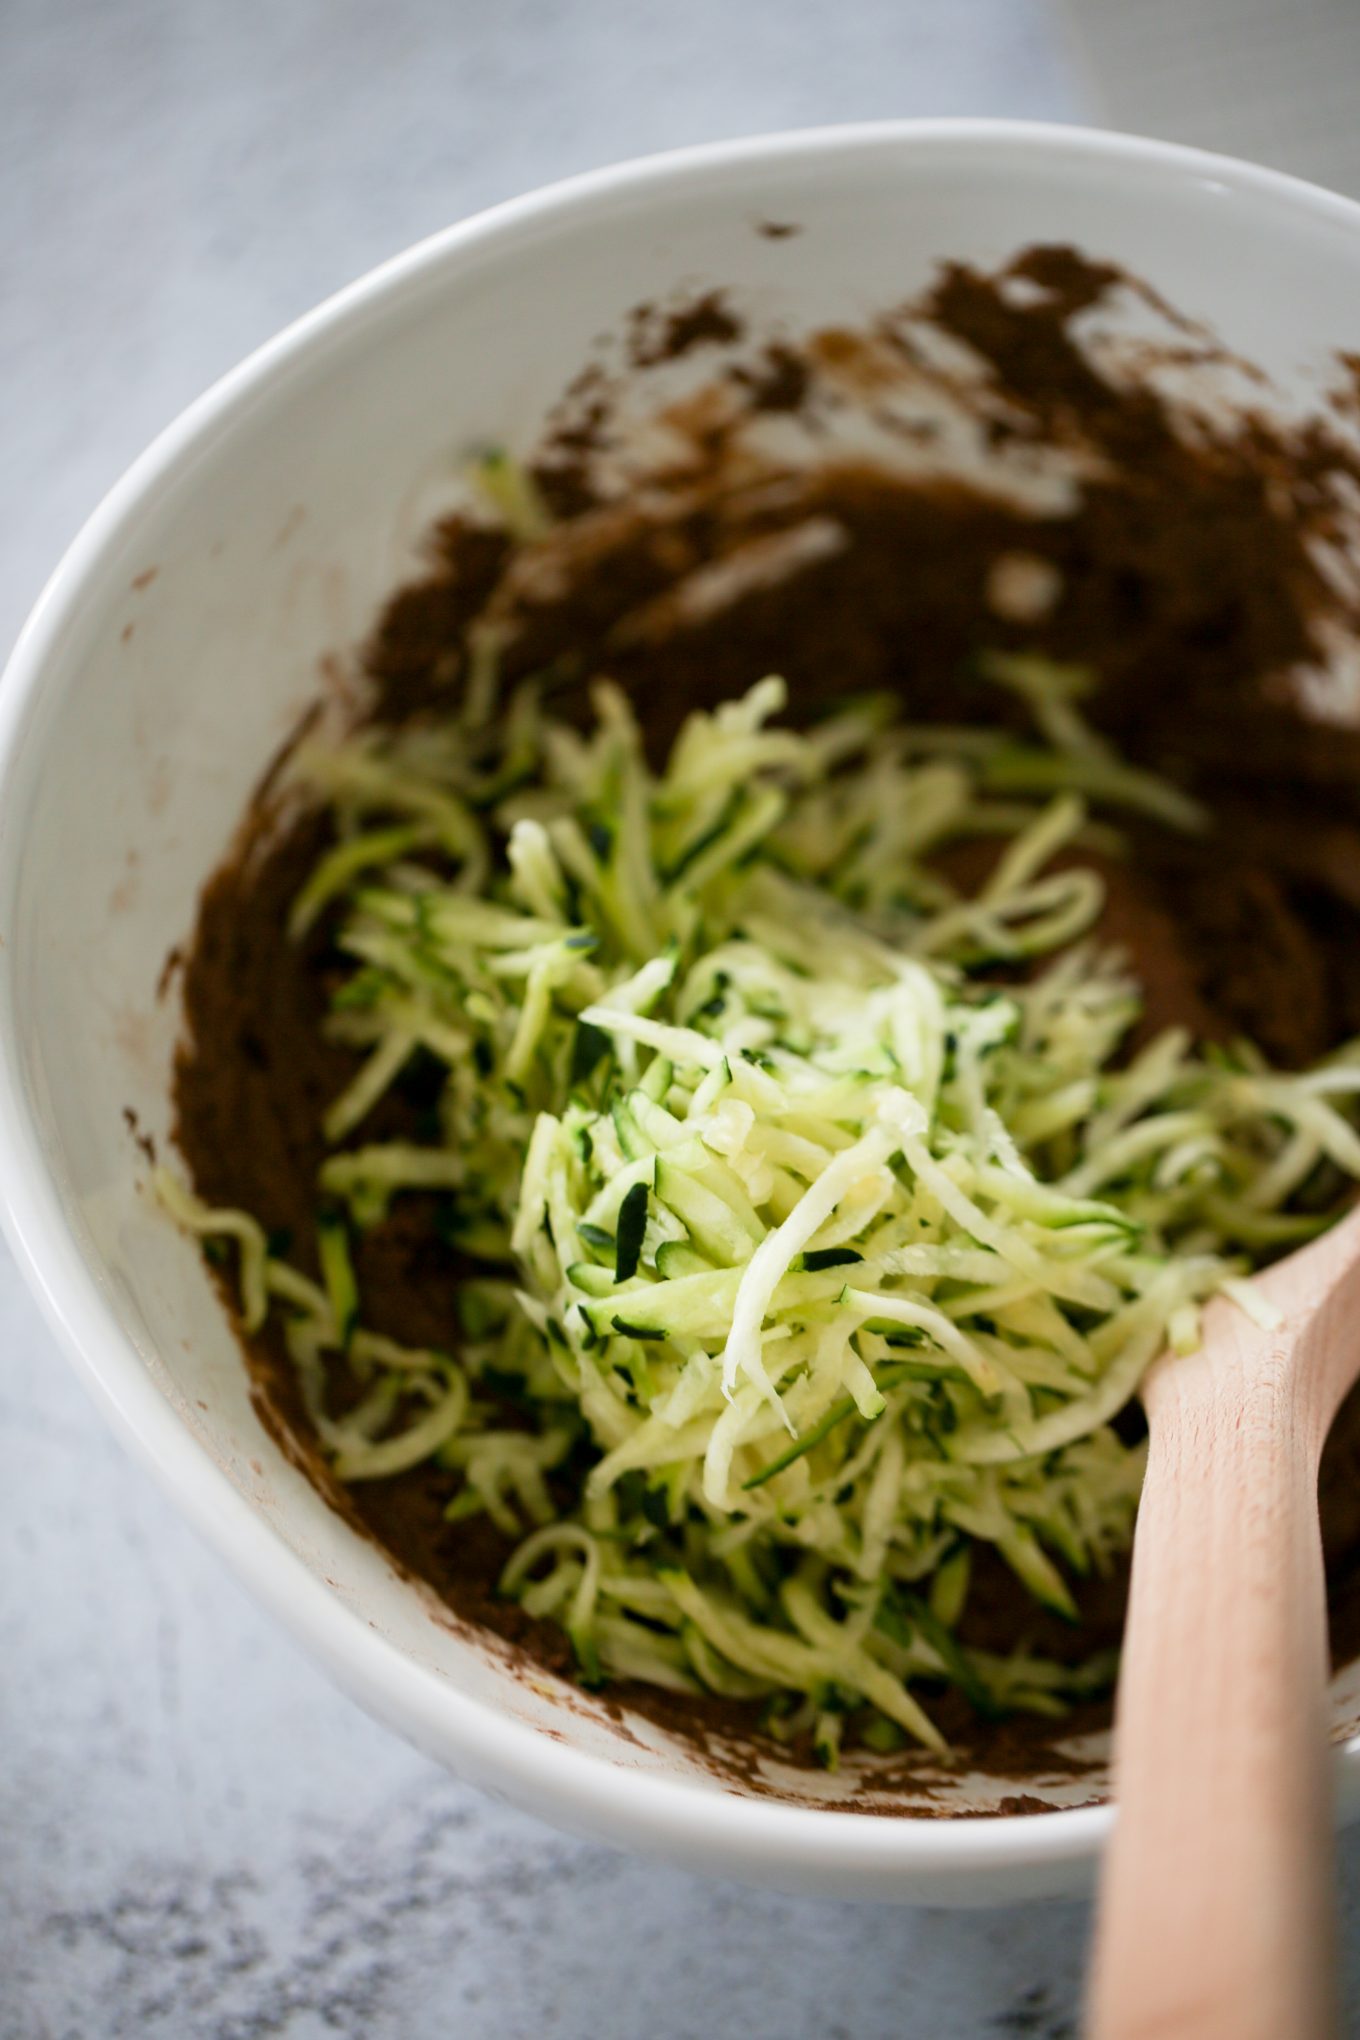 adding shredded zucchini to the muffin batter